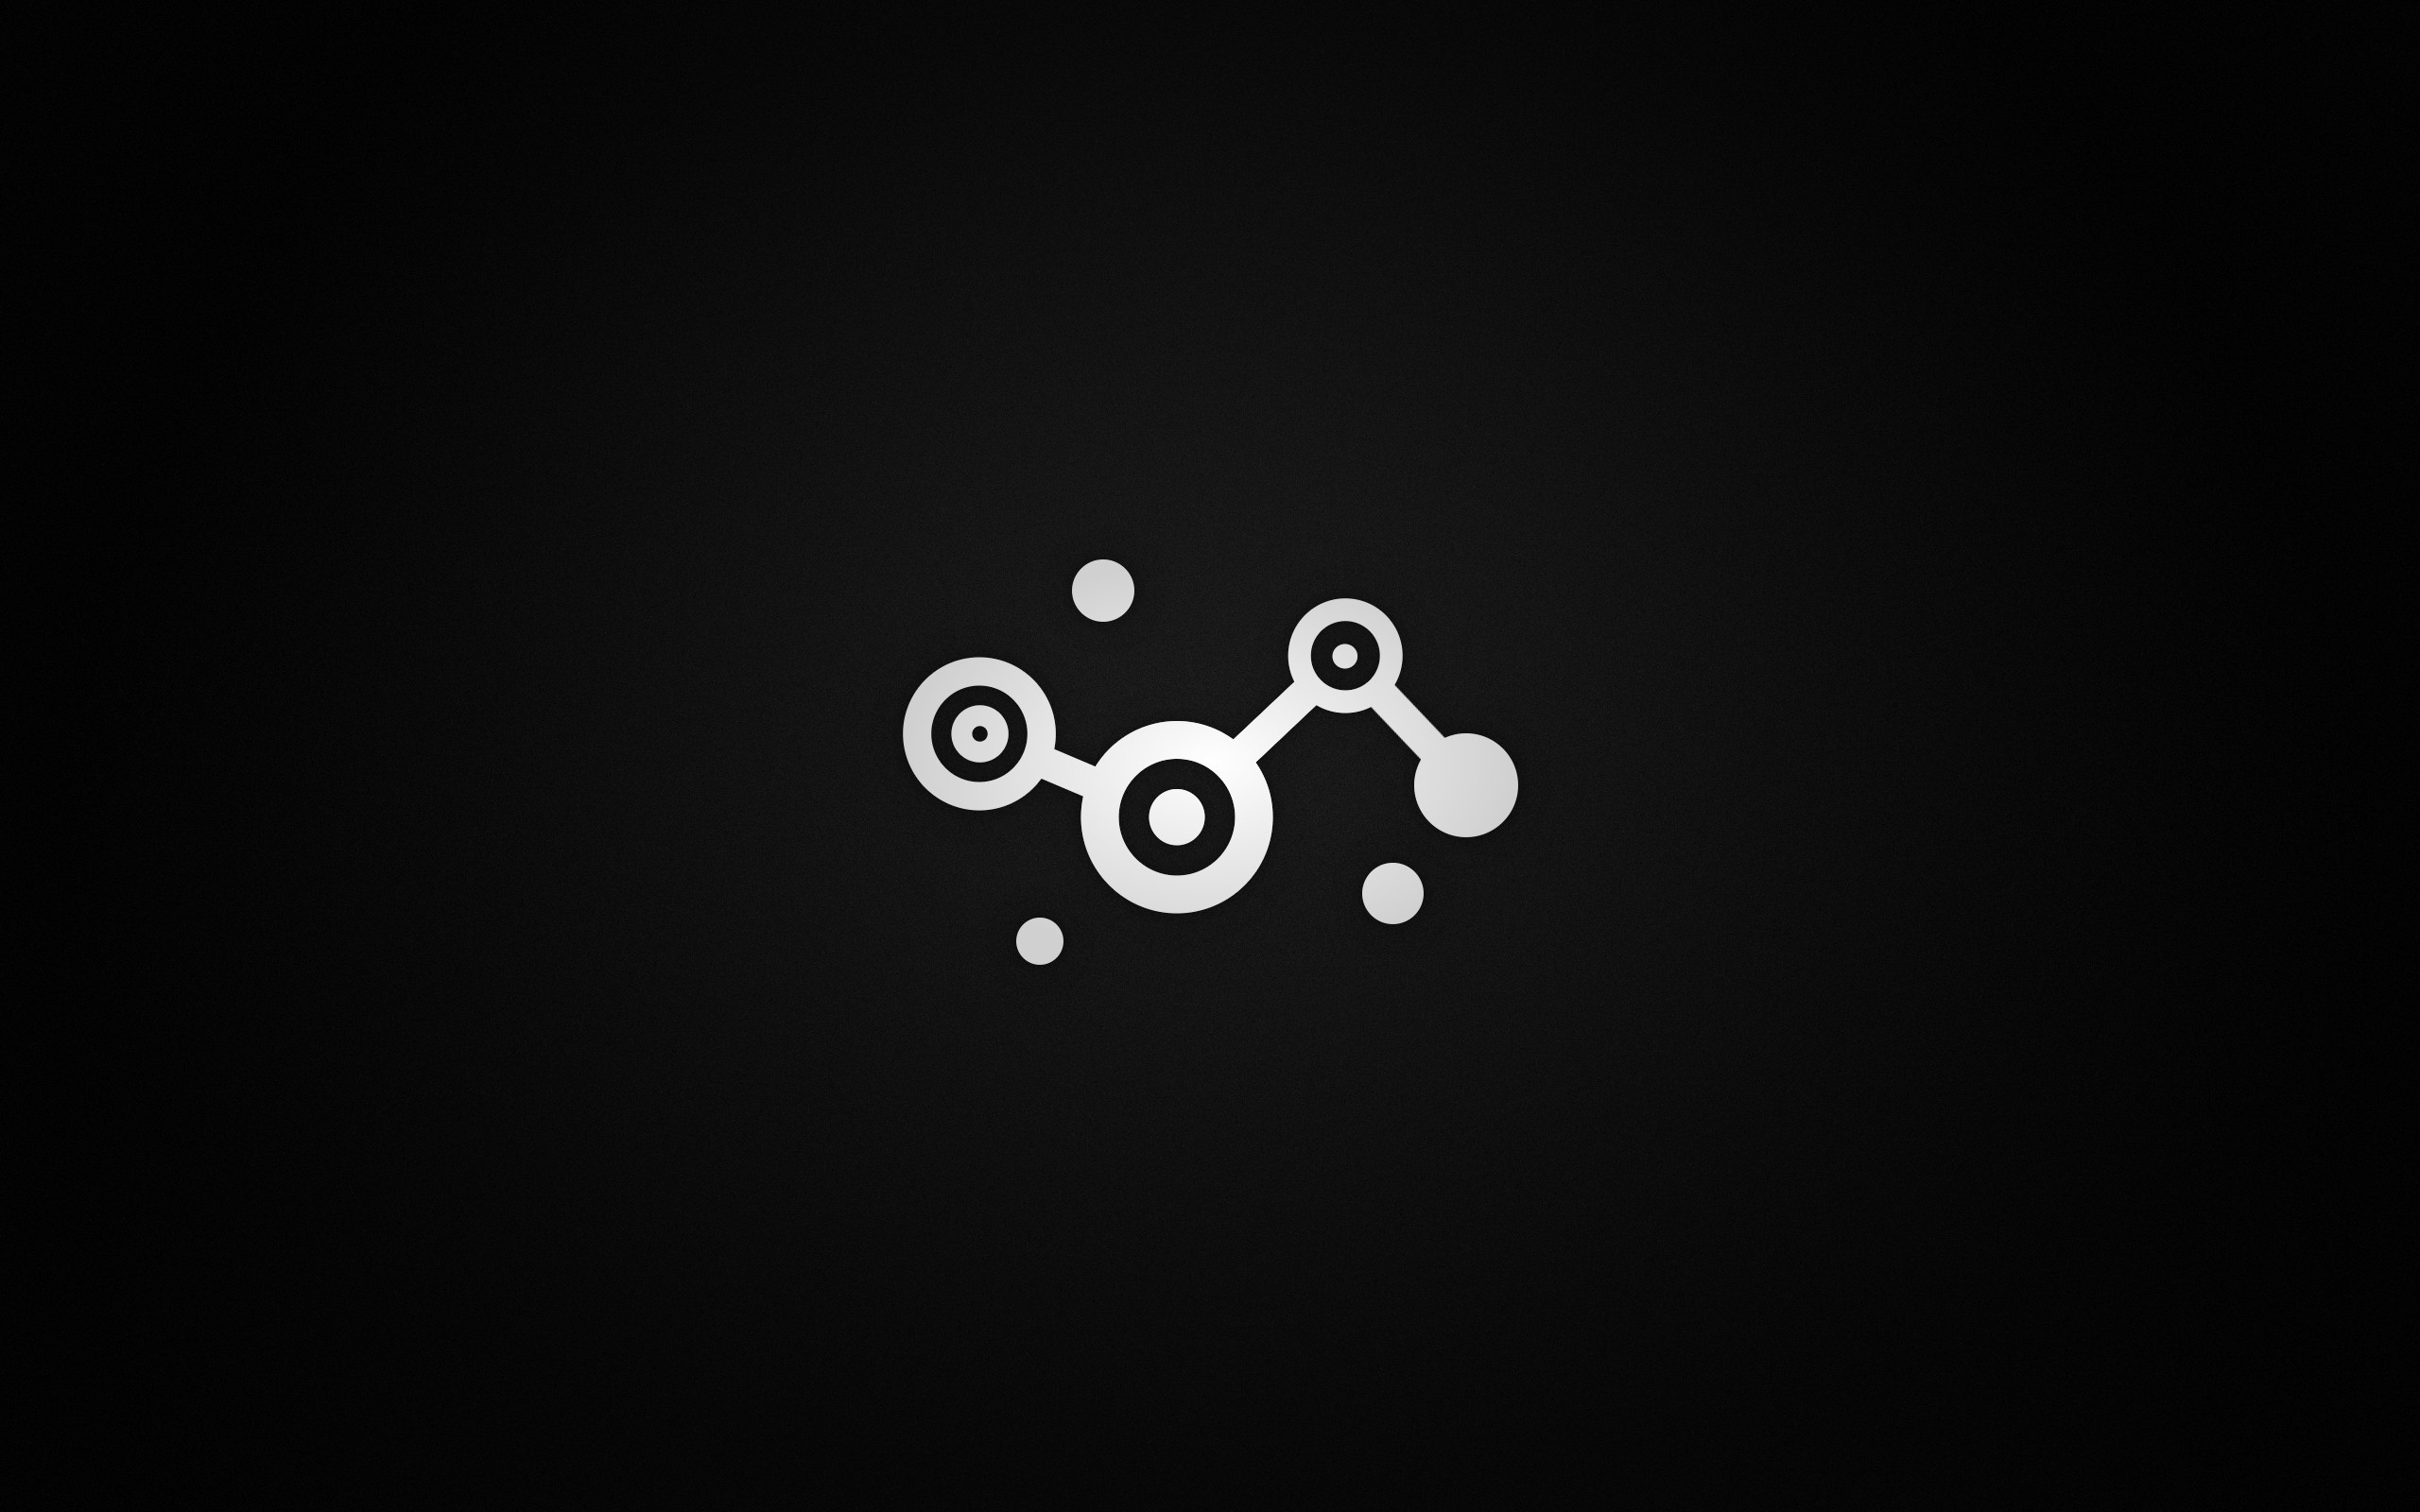 Steam Logo Minimalist HD Wallpaper. ImgPrix.com – High Definition Wallpapers and Covers